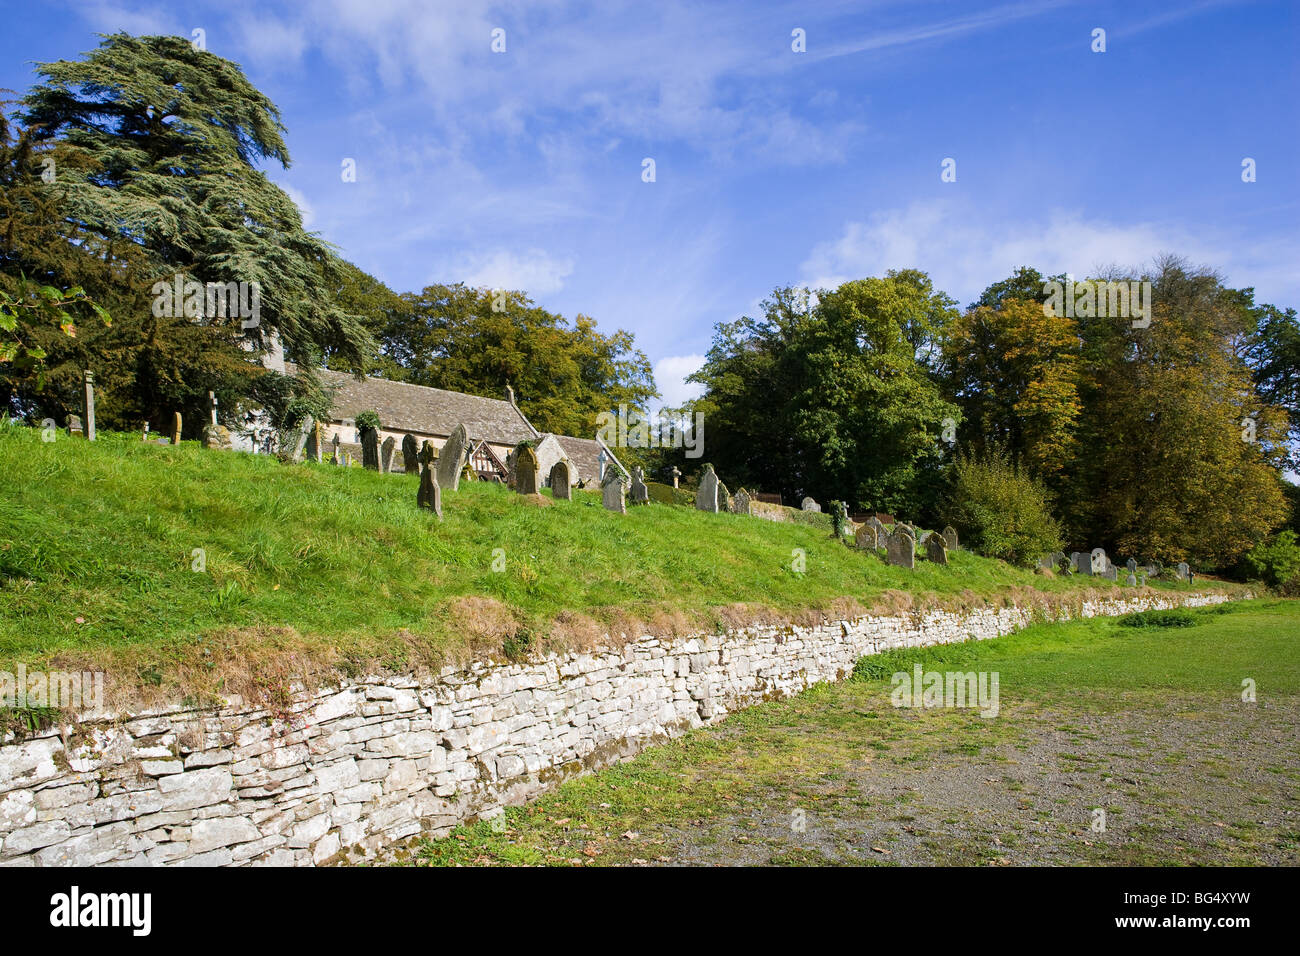 Galles Galles Wales paese paese Campagna campagna Cimitero Cimitero Cimitero Foto Stock